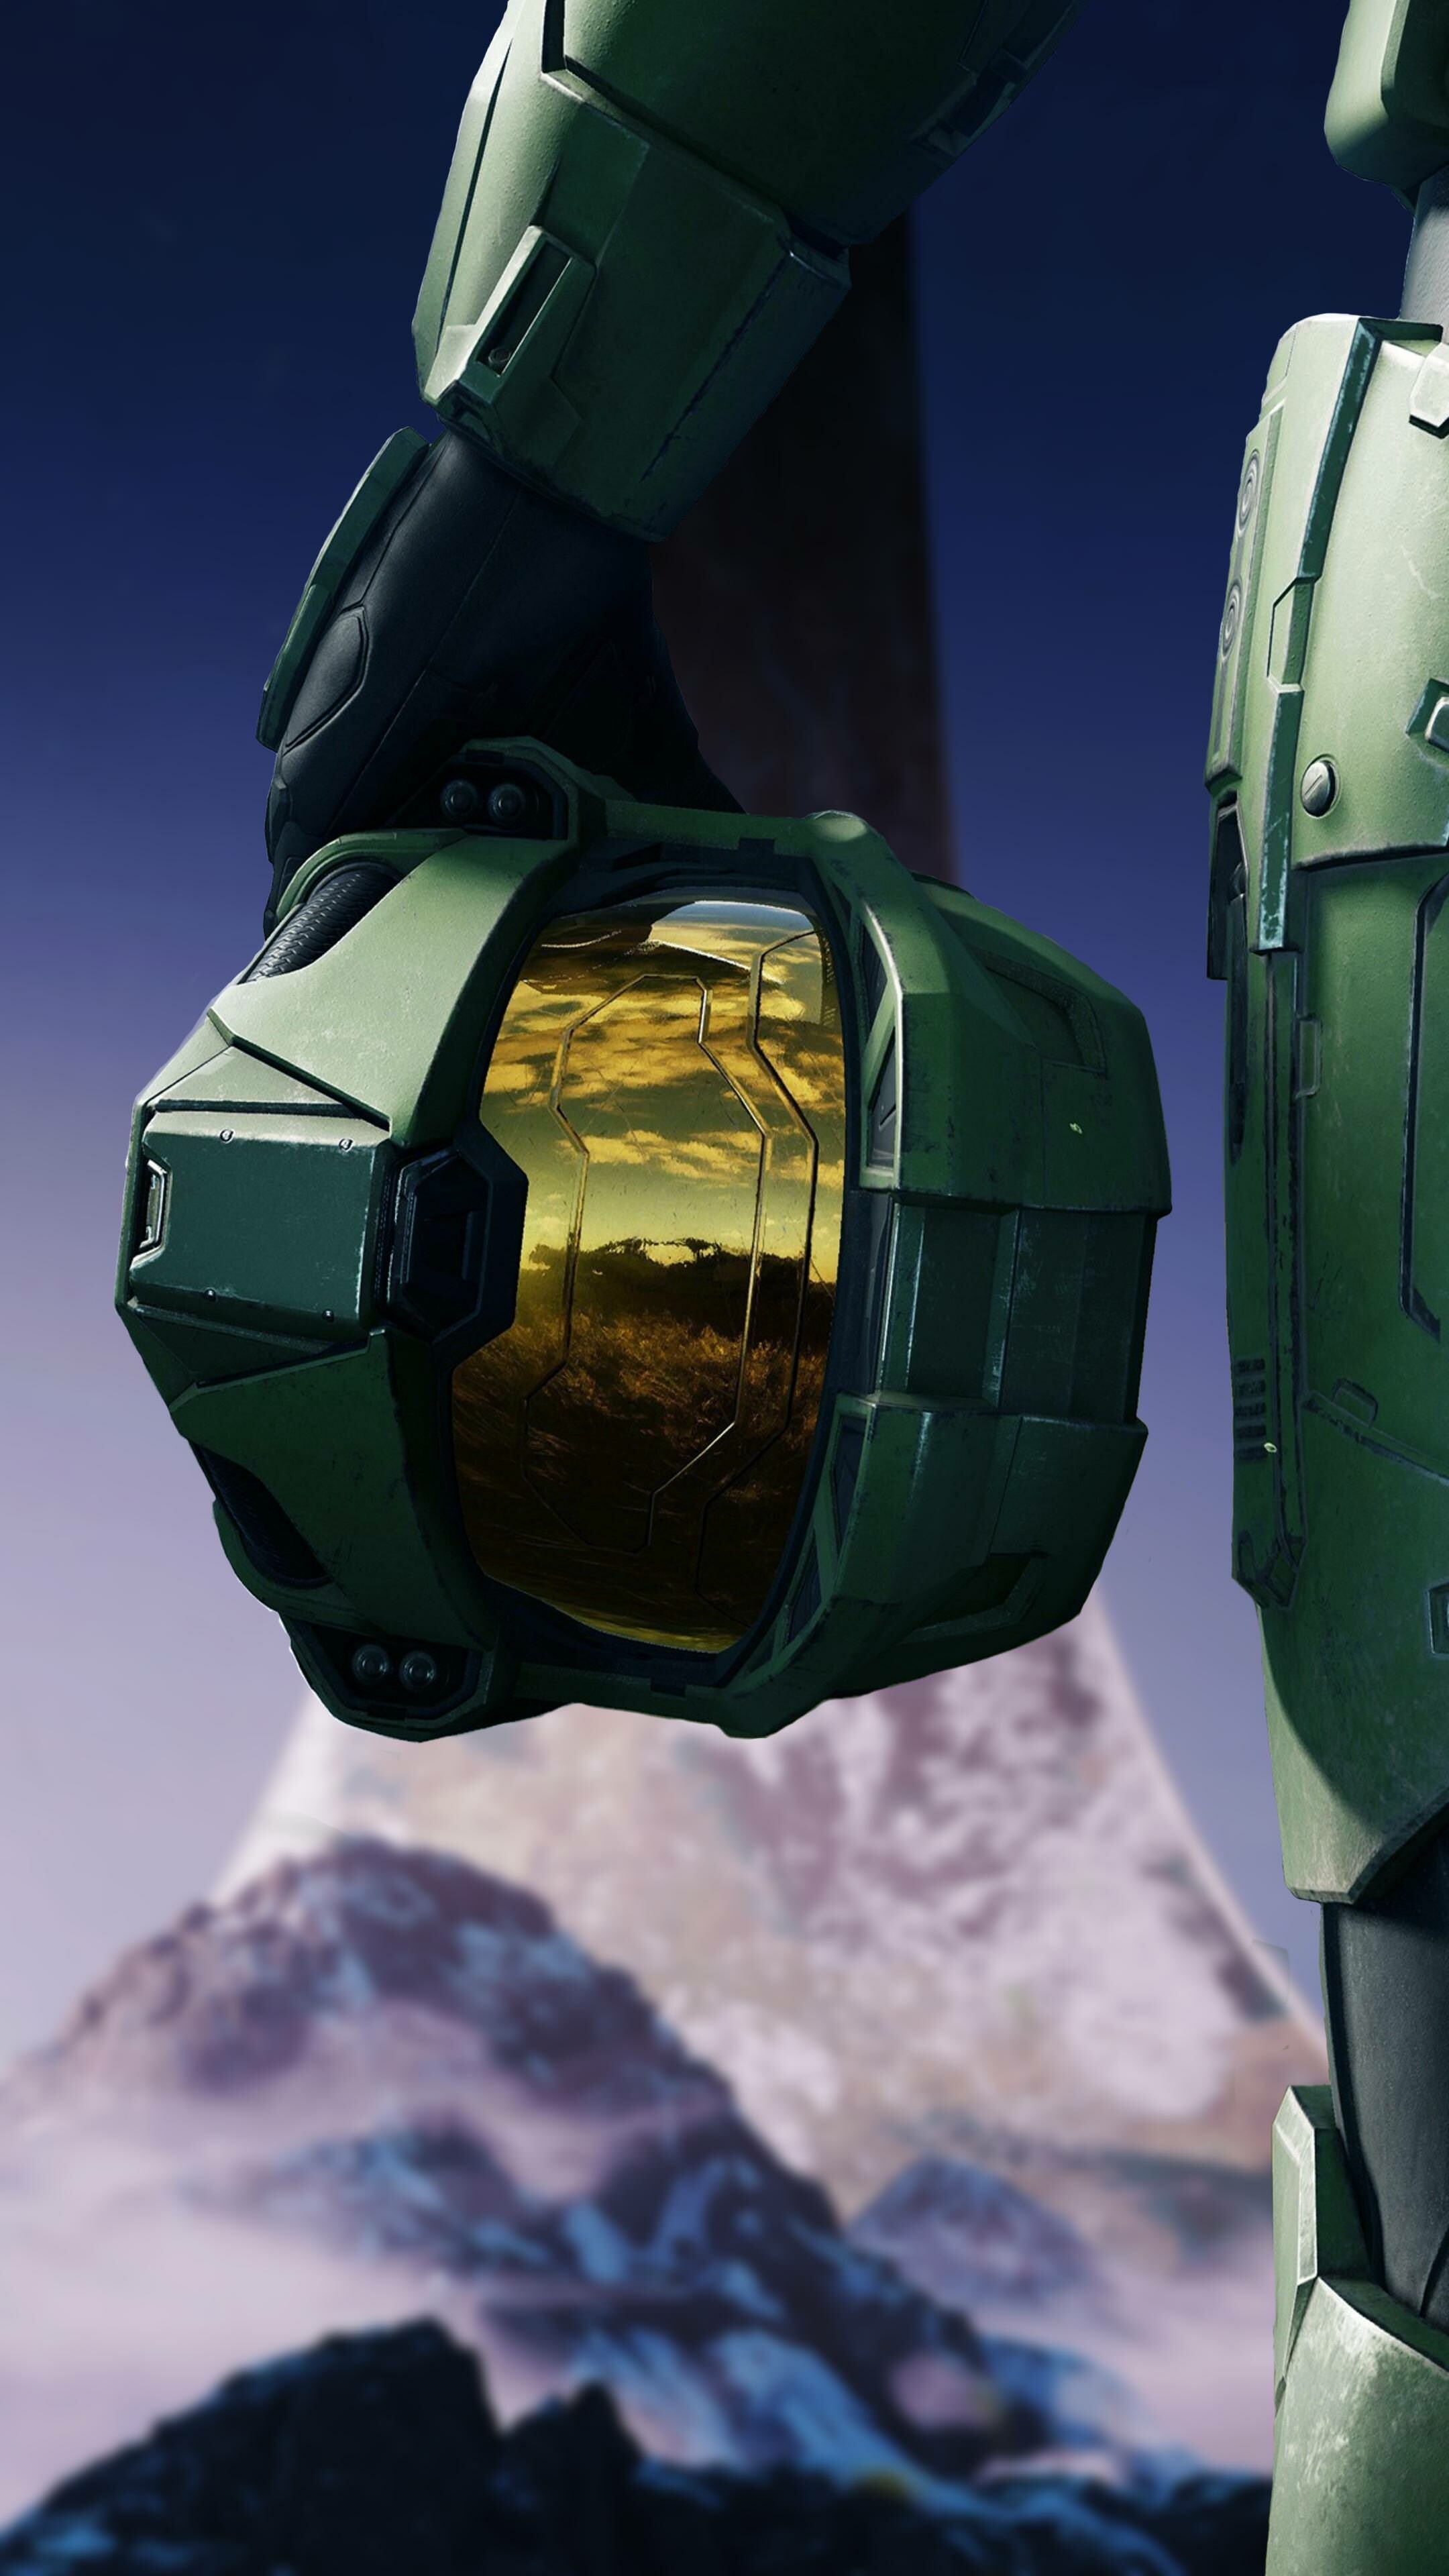 Halo: The franchise began with a single video game in 2001, but now spans numerous record-breaking games, best-selling novels, comic book series, animated series, toys, and collectibles, 343 Industries. 2160x3840 4K Background.